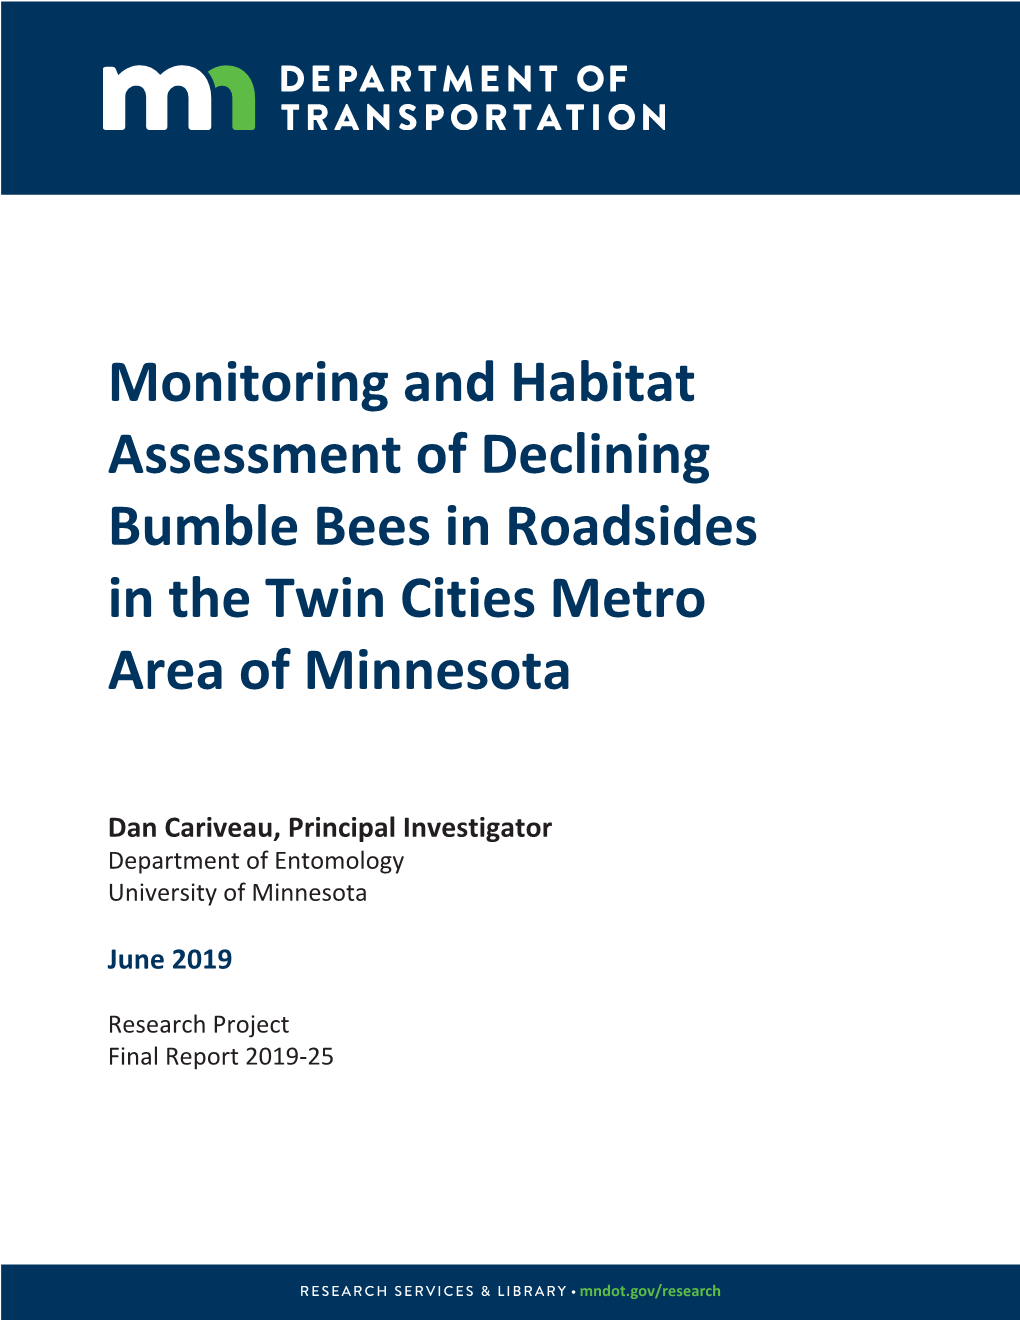 Monitoring and Habitat Assessment of Declining Bumble Bees in Roadsides in the Twin Cities Metro Area of Minnesota